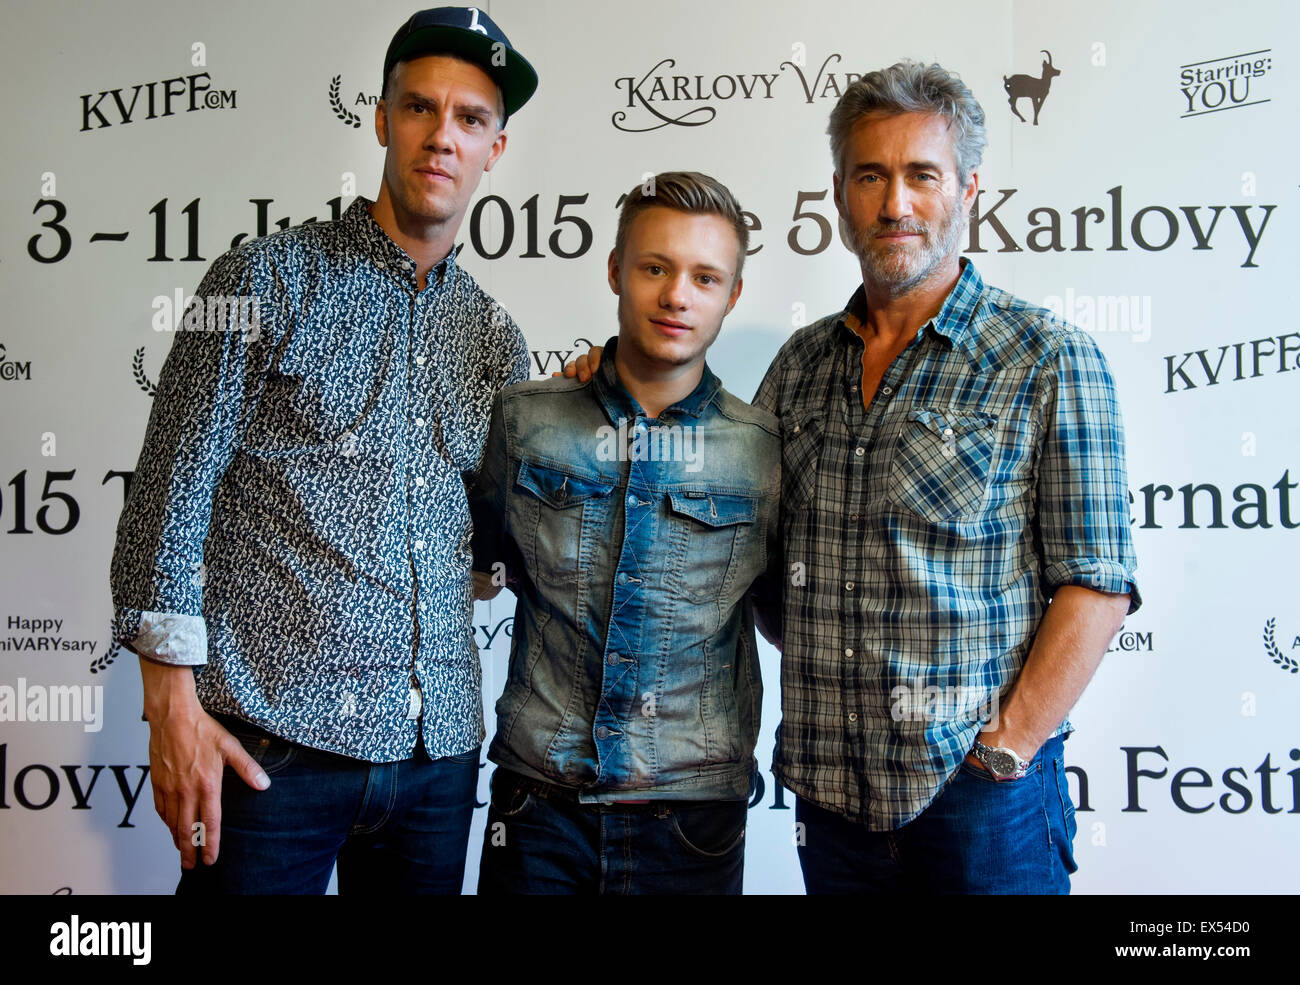 Karlovy Vary, Czech Republic, 6th July, 2015. From left: director Francois Peloquin, actors Antoine L'Ecuyer and Roy Dupuis present movie The Sound of Trees during the 50th International Film Festival Karlovy Vary, Czech Republic, July 6, 2015. © Slavomir Kubes/CTK Photo/Alamy Live News Stock Photo